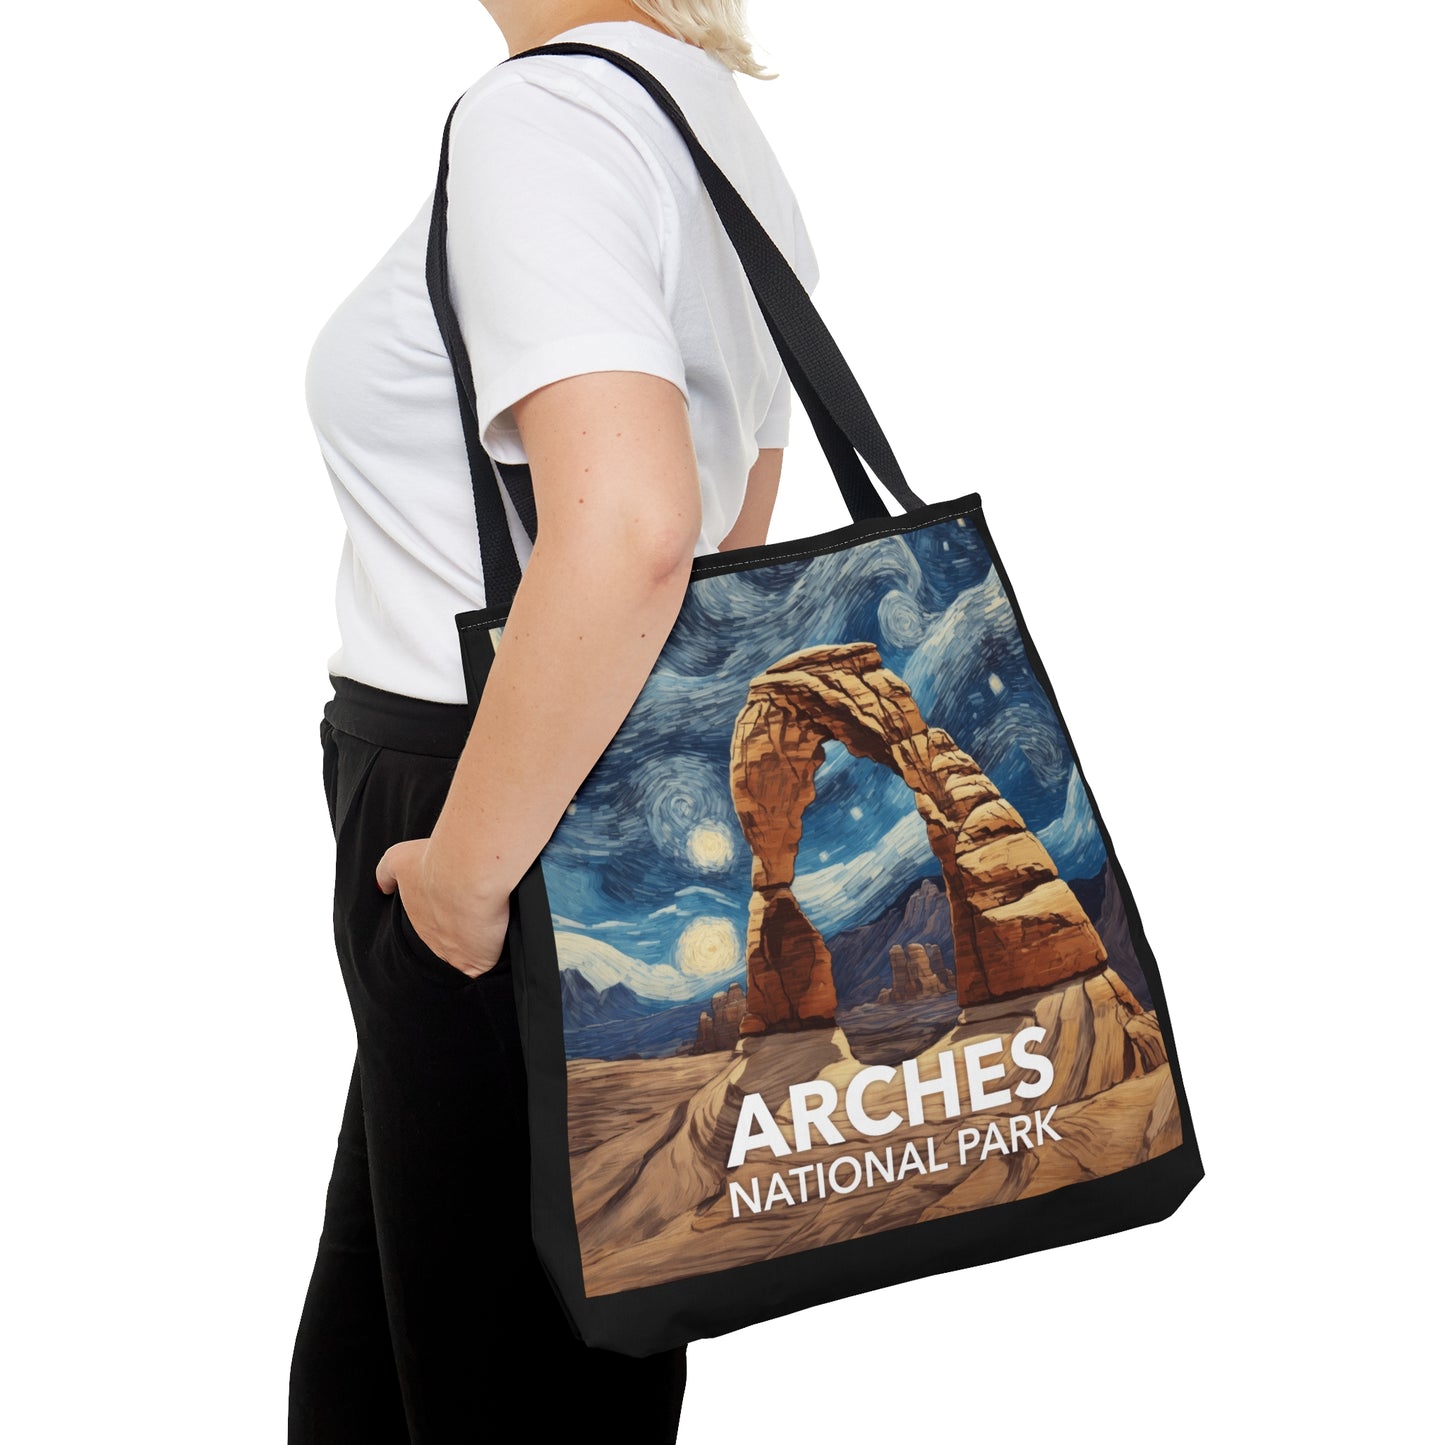 Arches National Park Tote Bag - The Starry Night